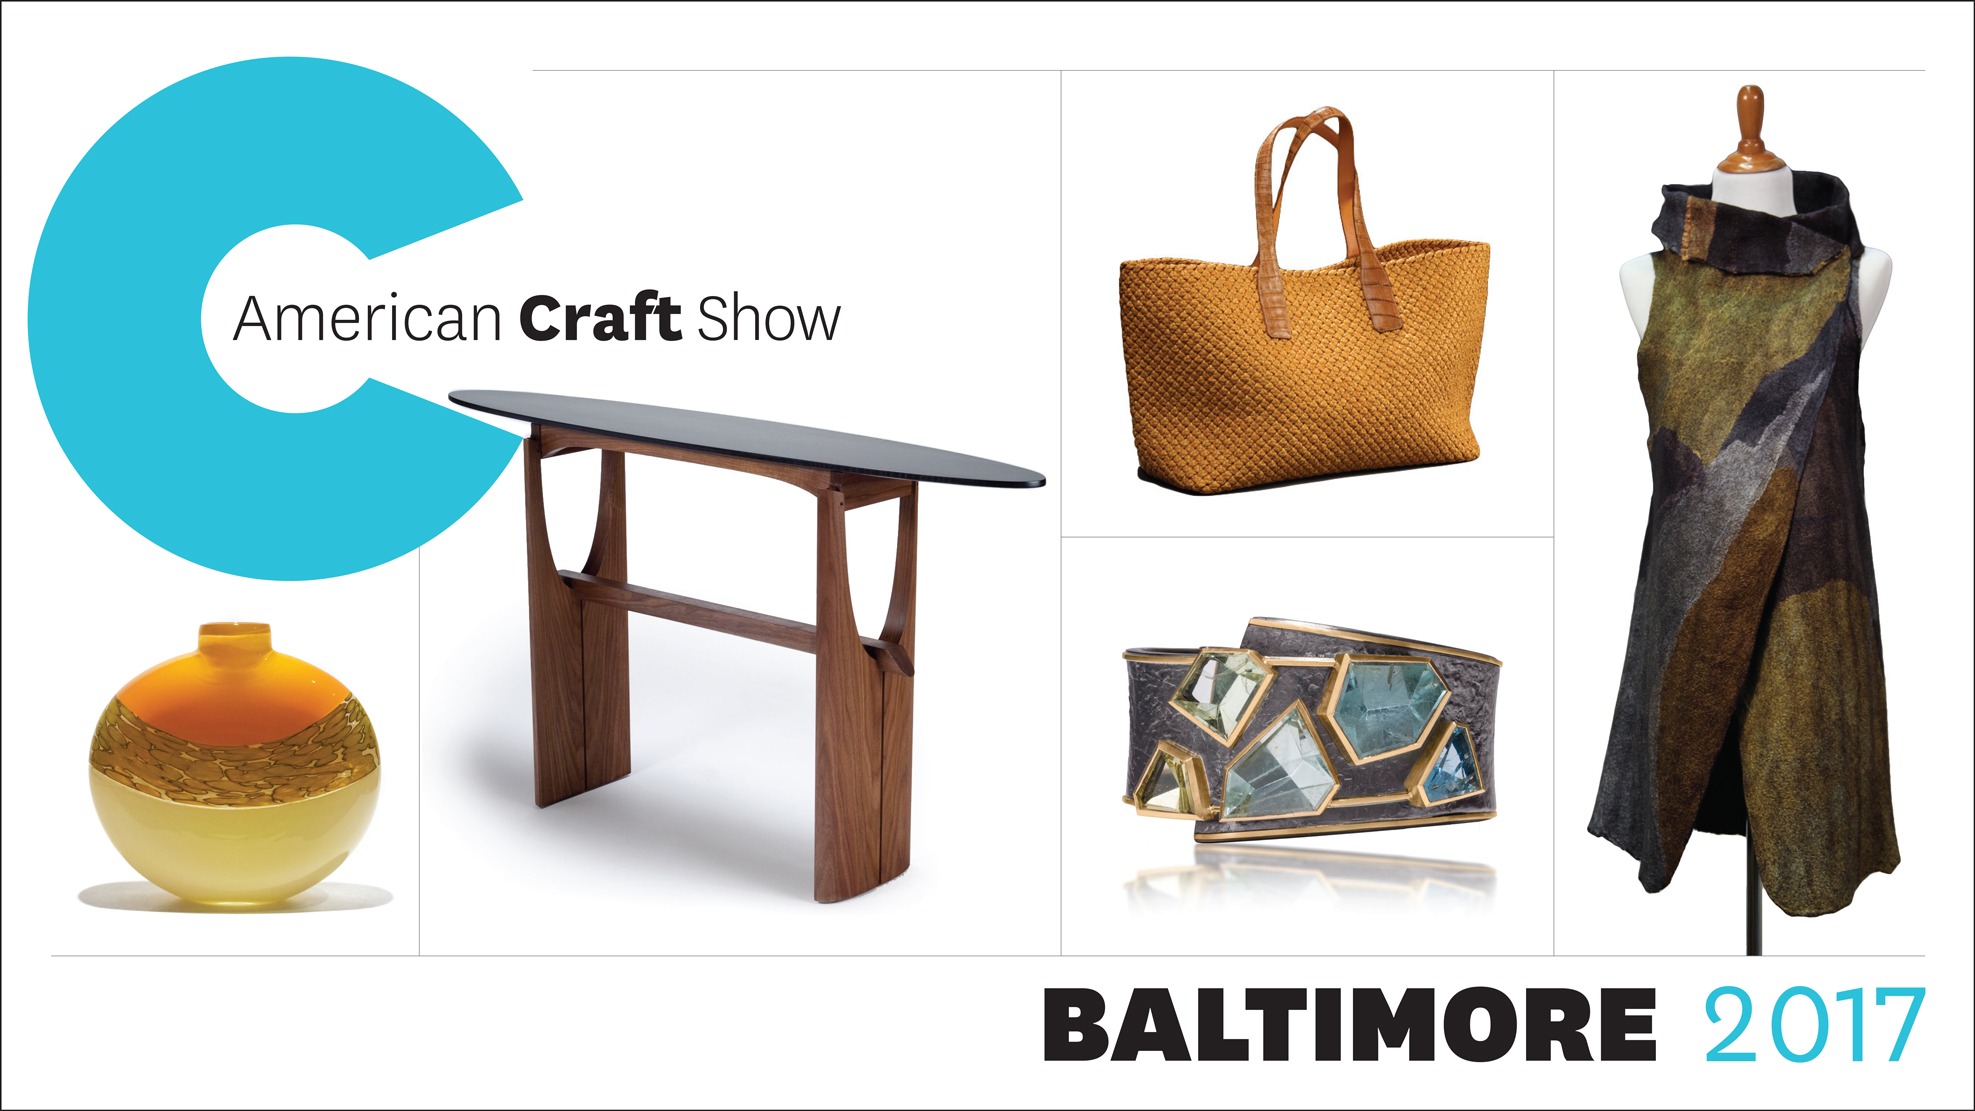 American Craft Show, Baltimore 2017 American Craft Council